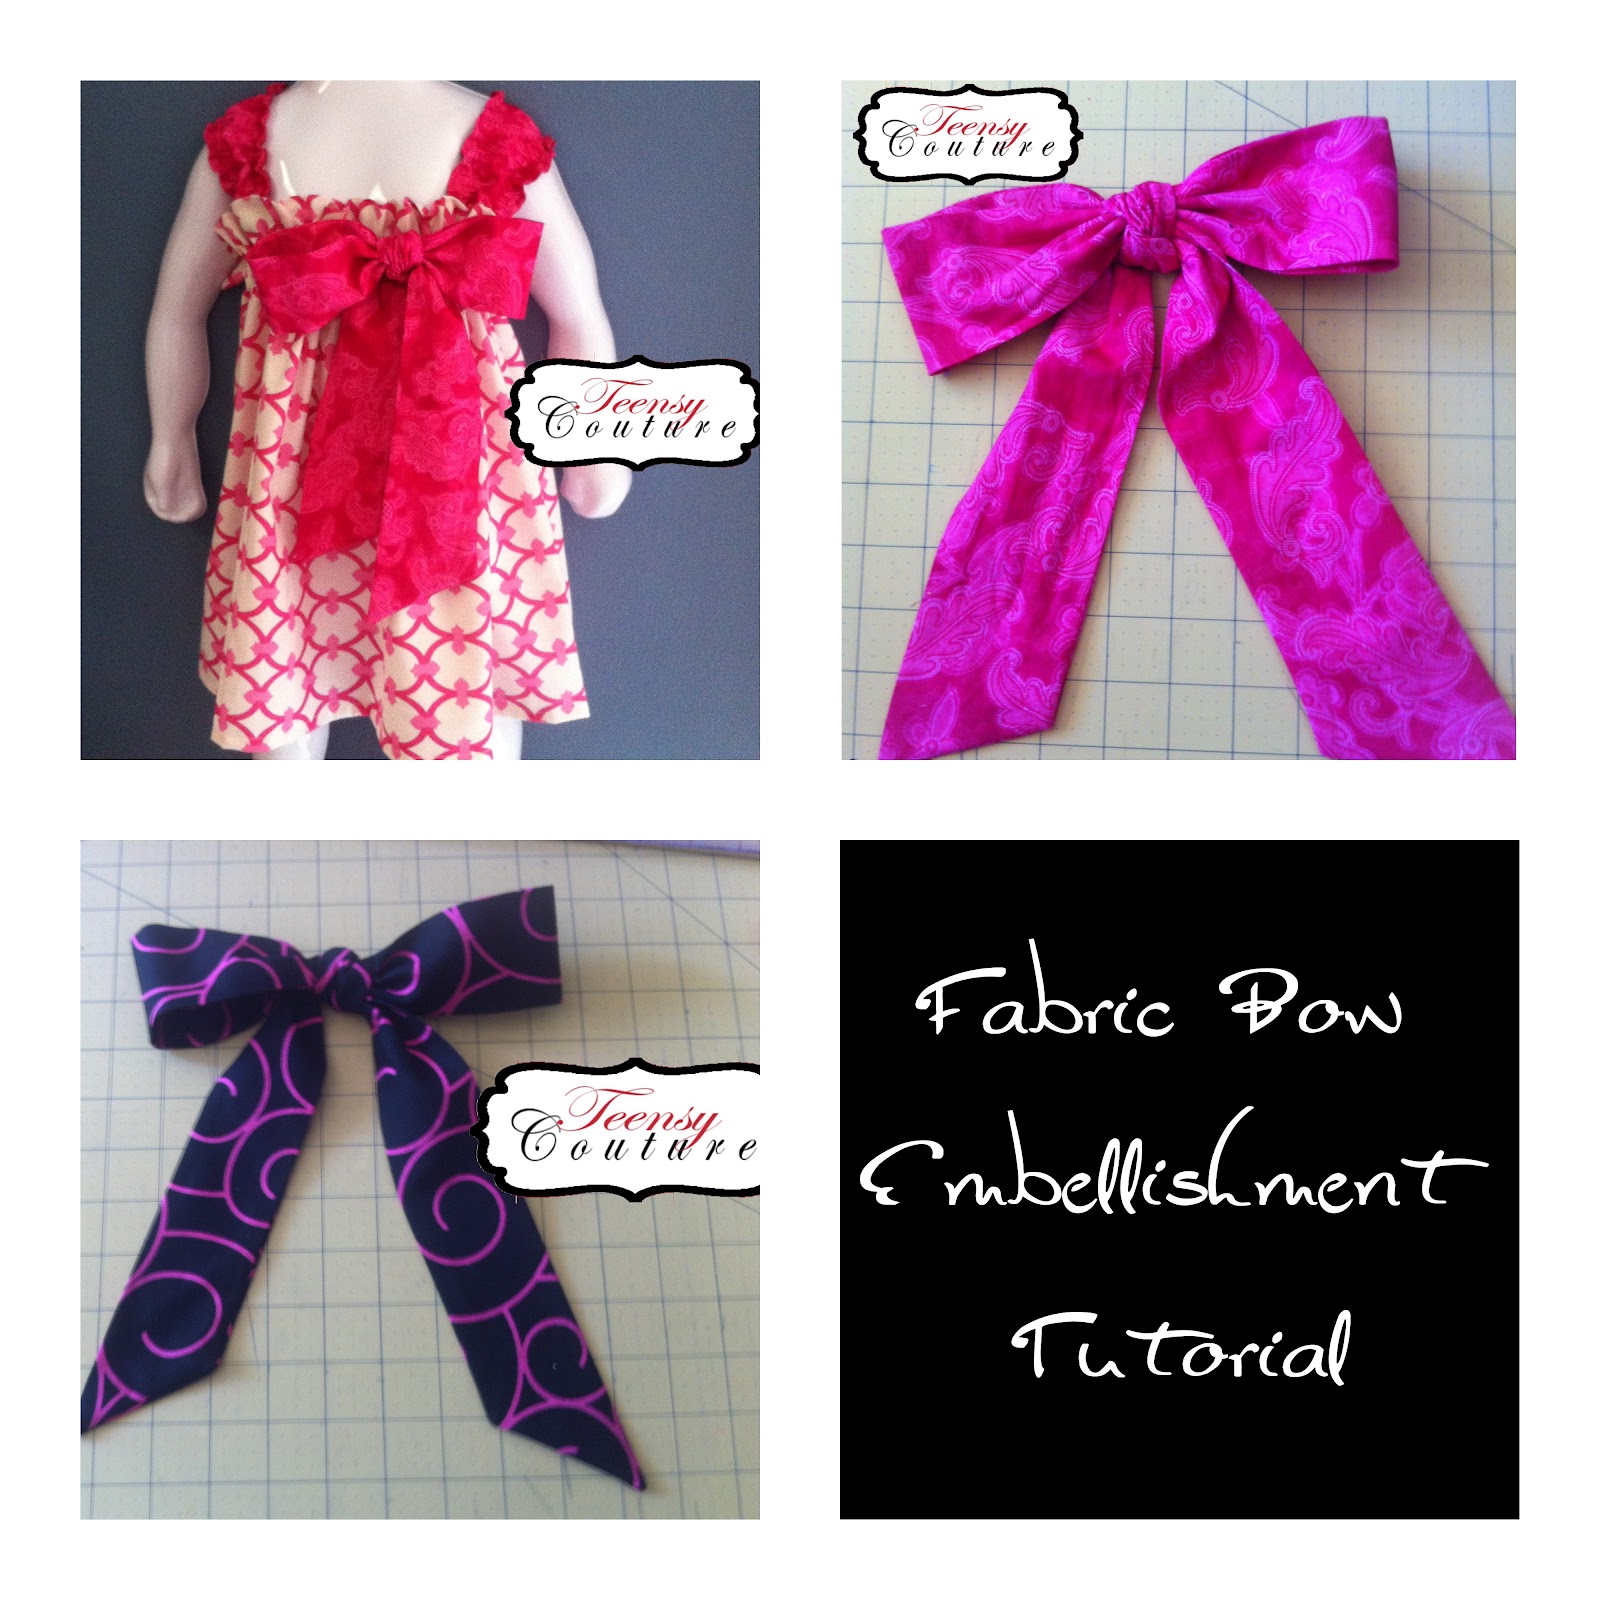 Teensy Couture: How to Make A Fabric Bow for Clothing